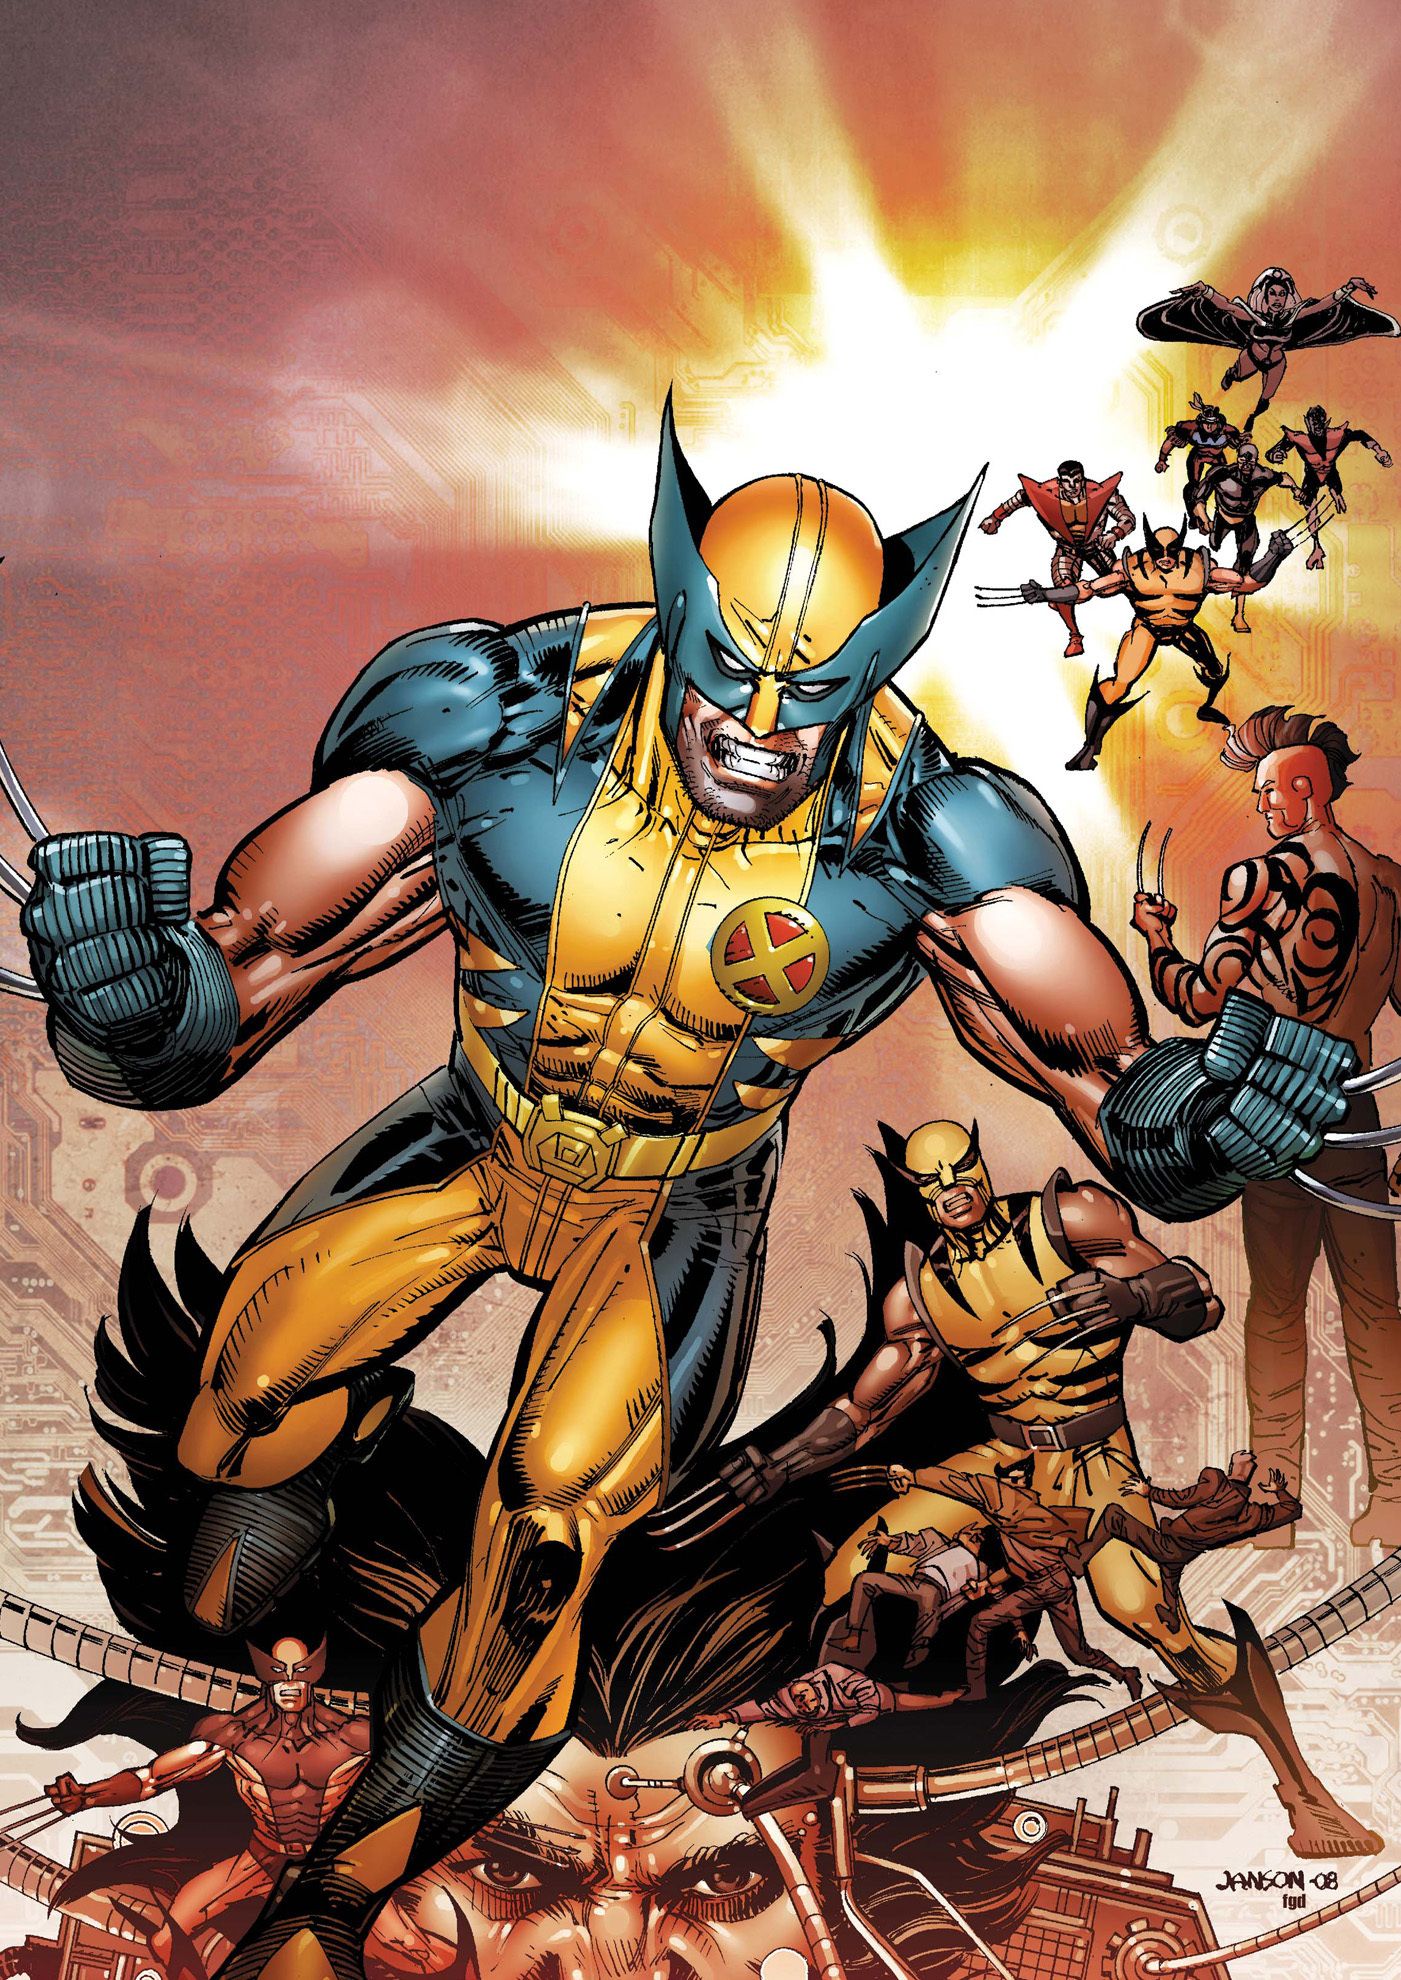 The Versions Of Wolverine On 'Earth 616' (Main Marvel Universe)